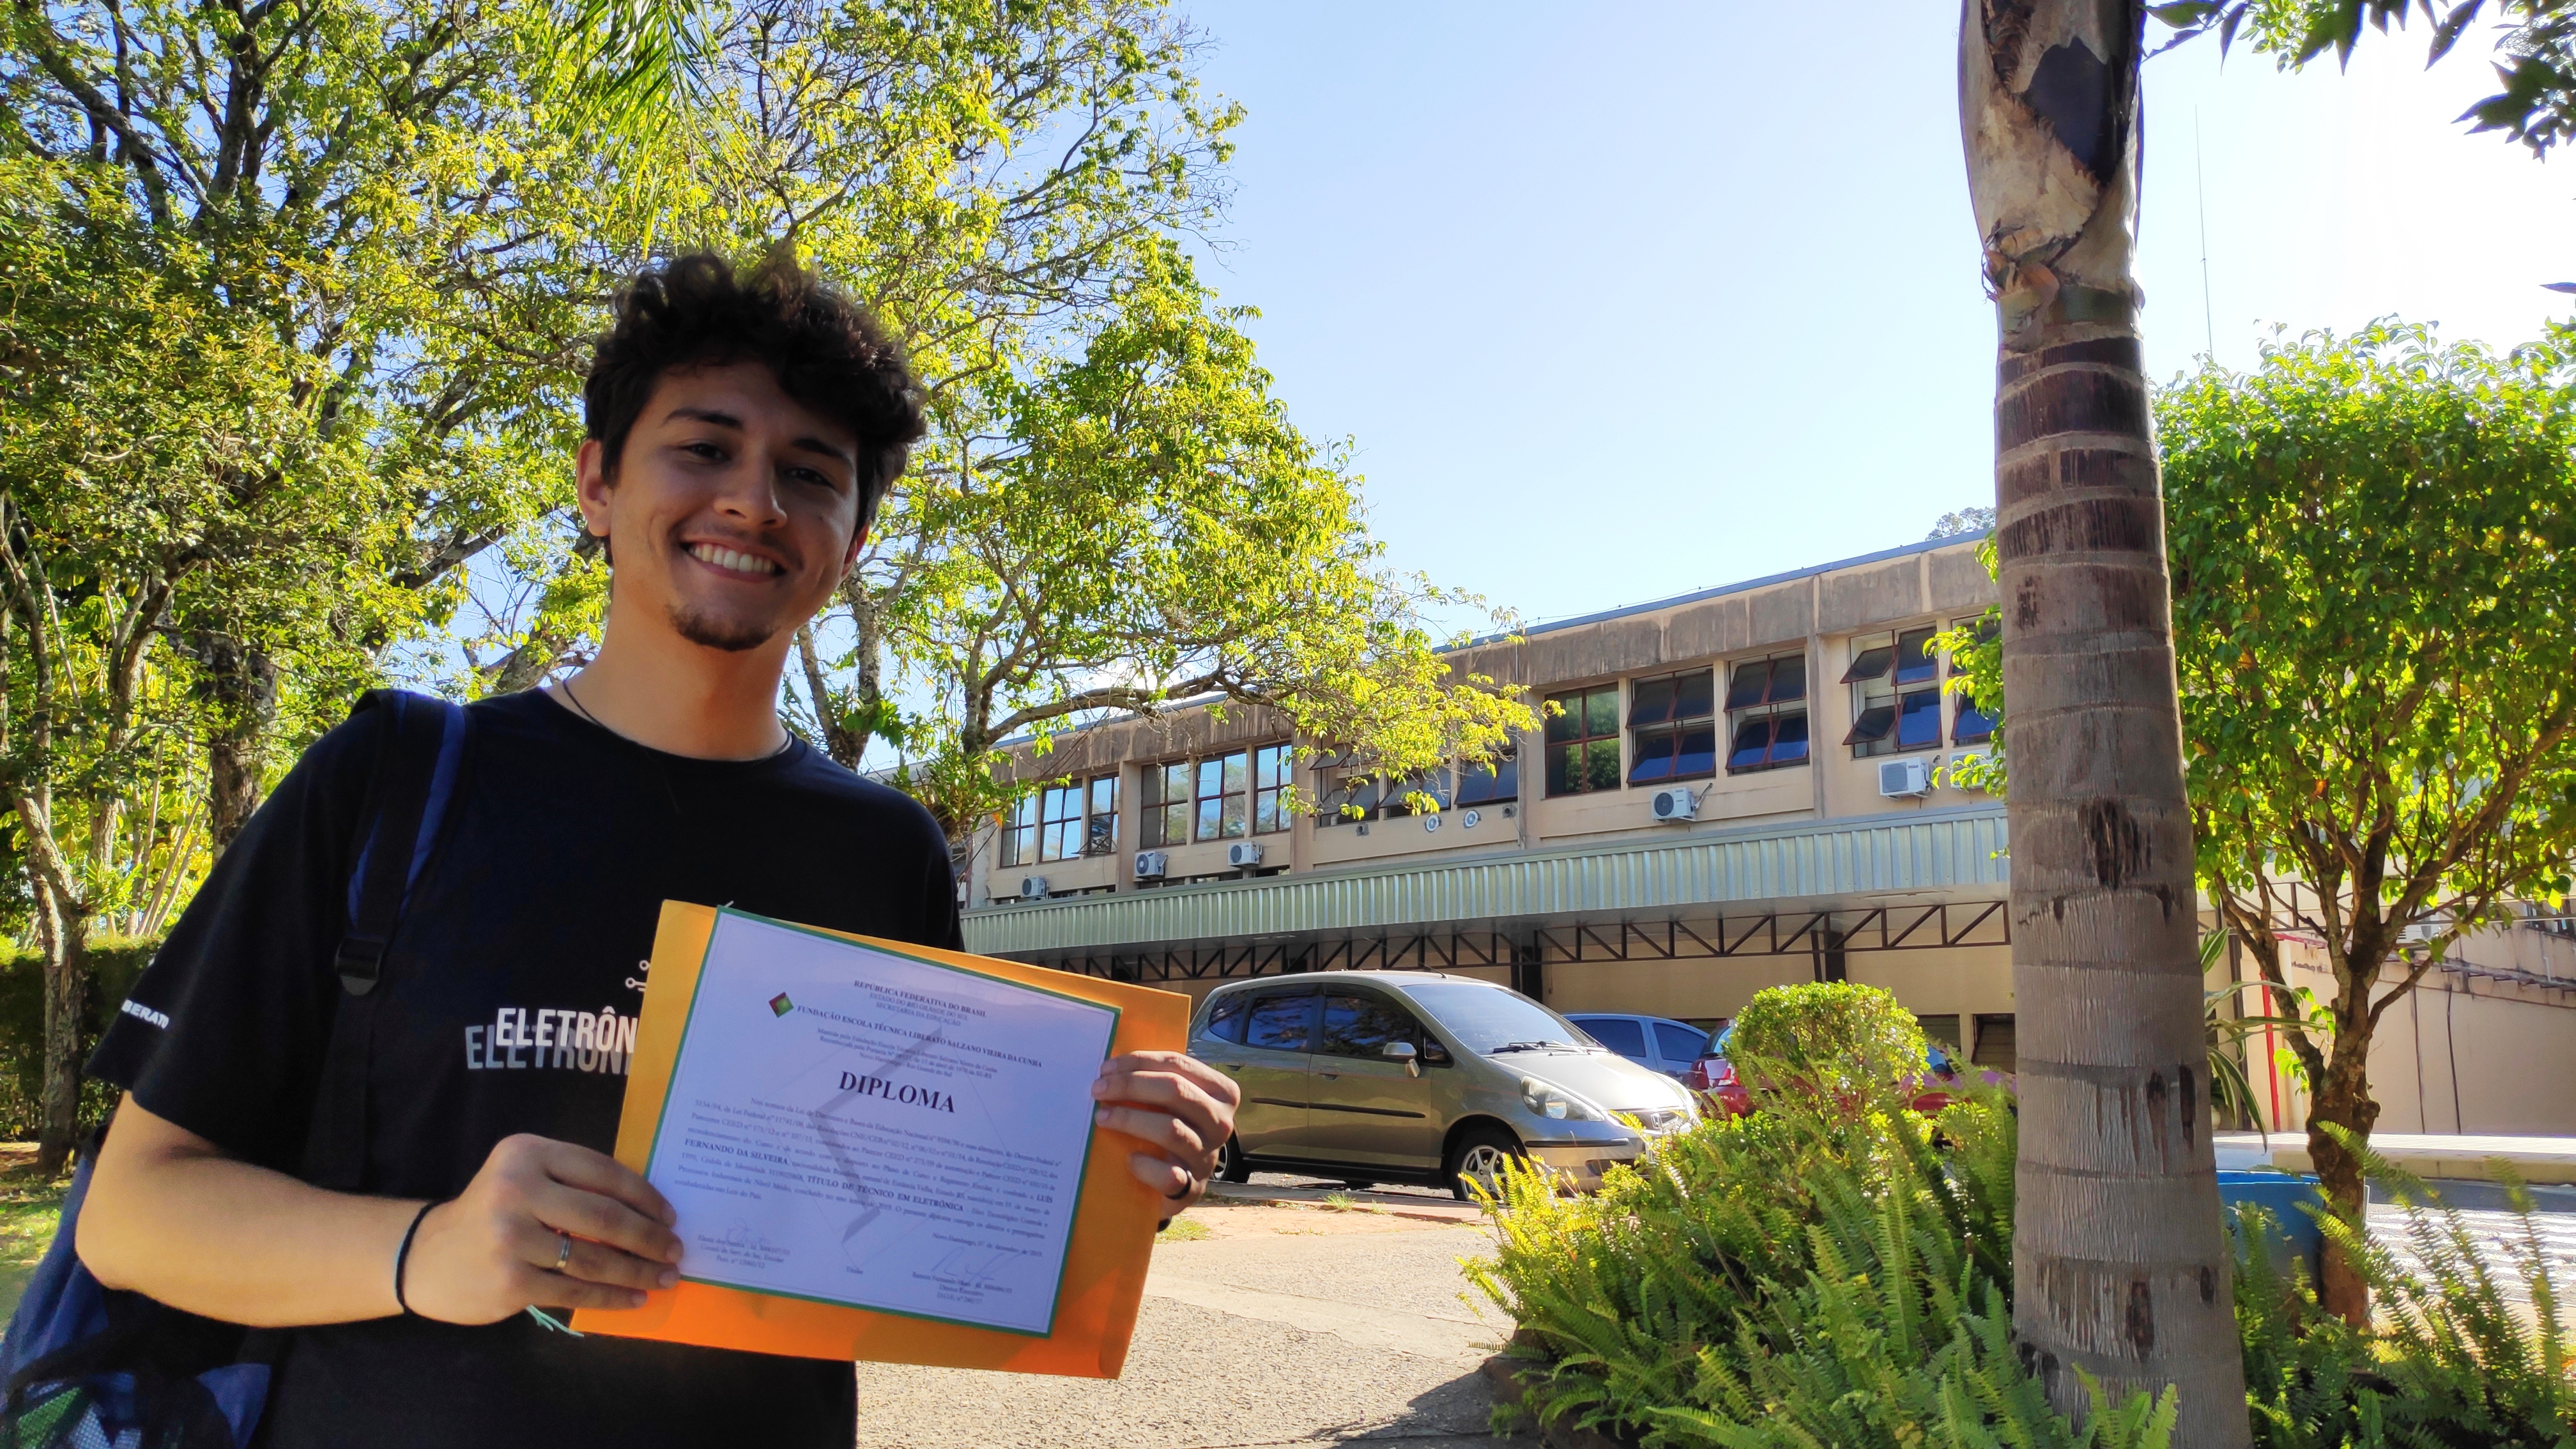 Luís with his technical diploma in front of his school